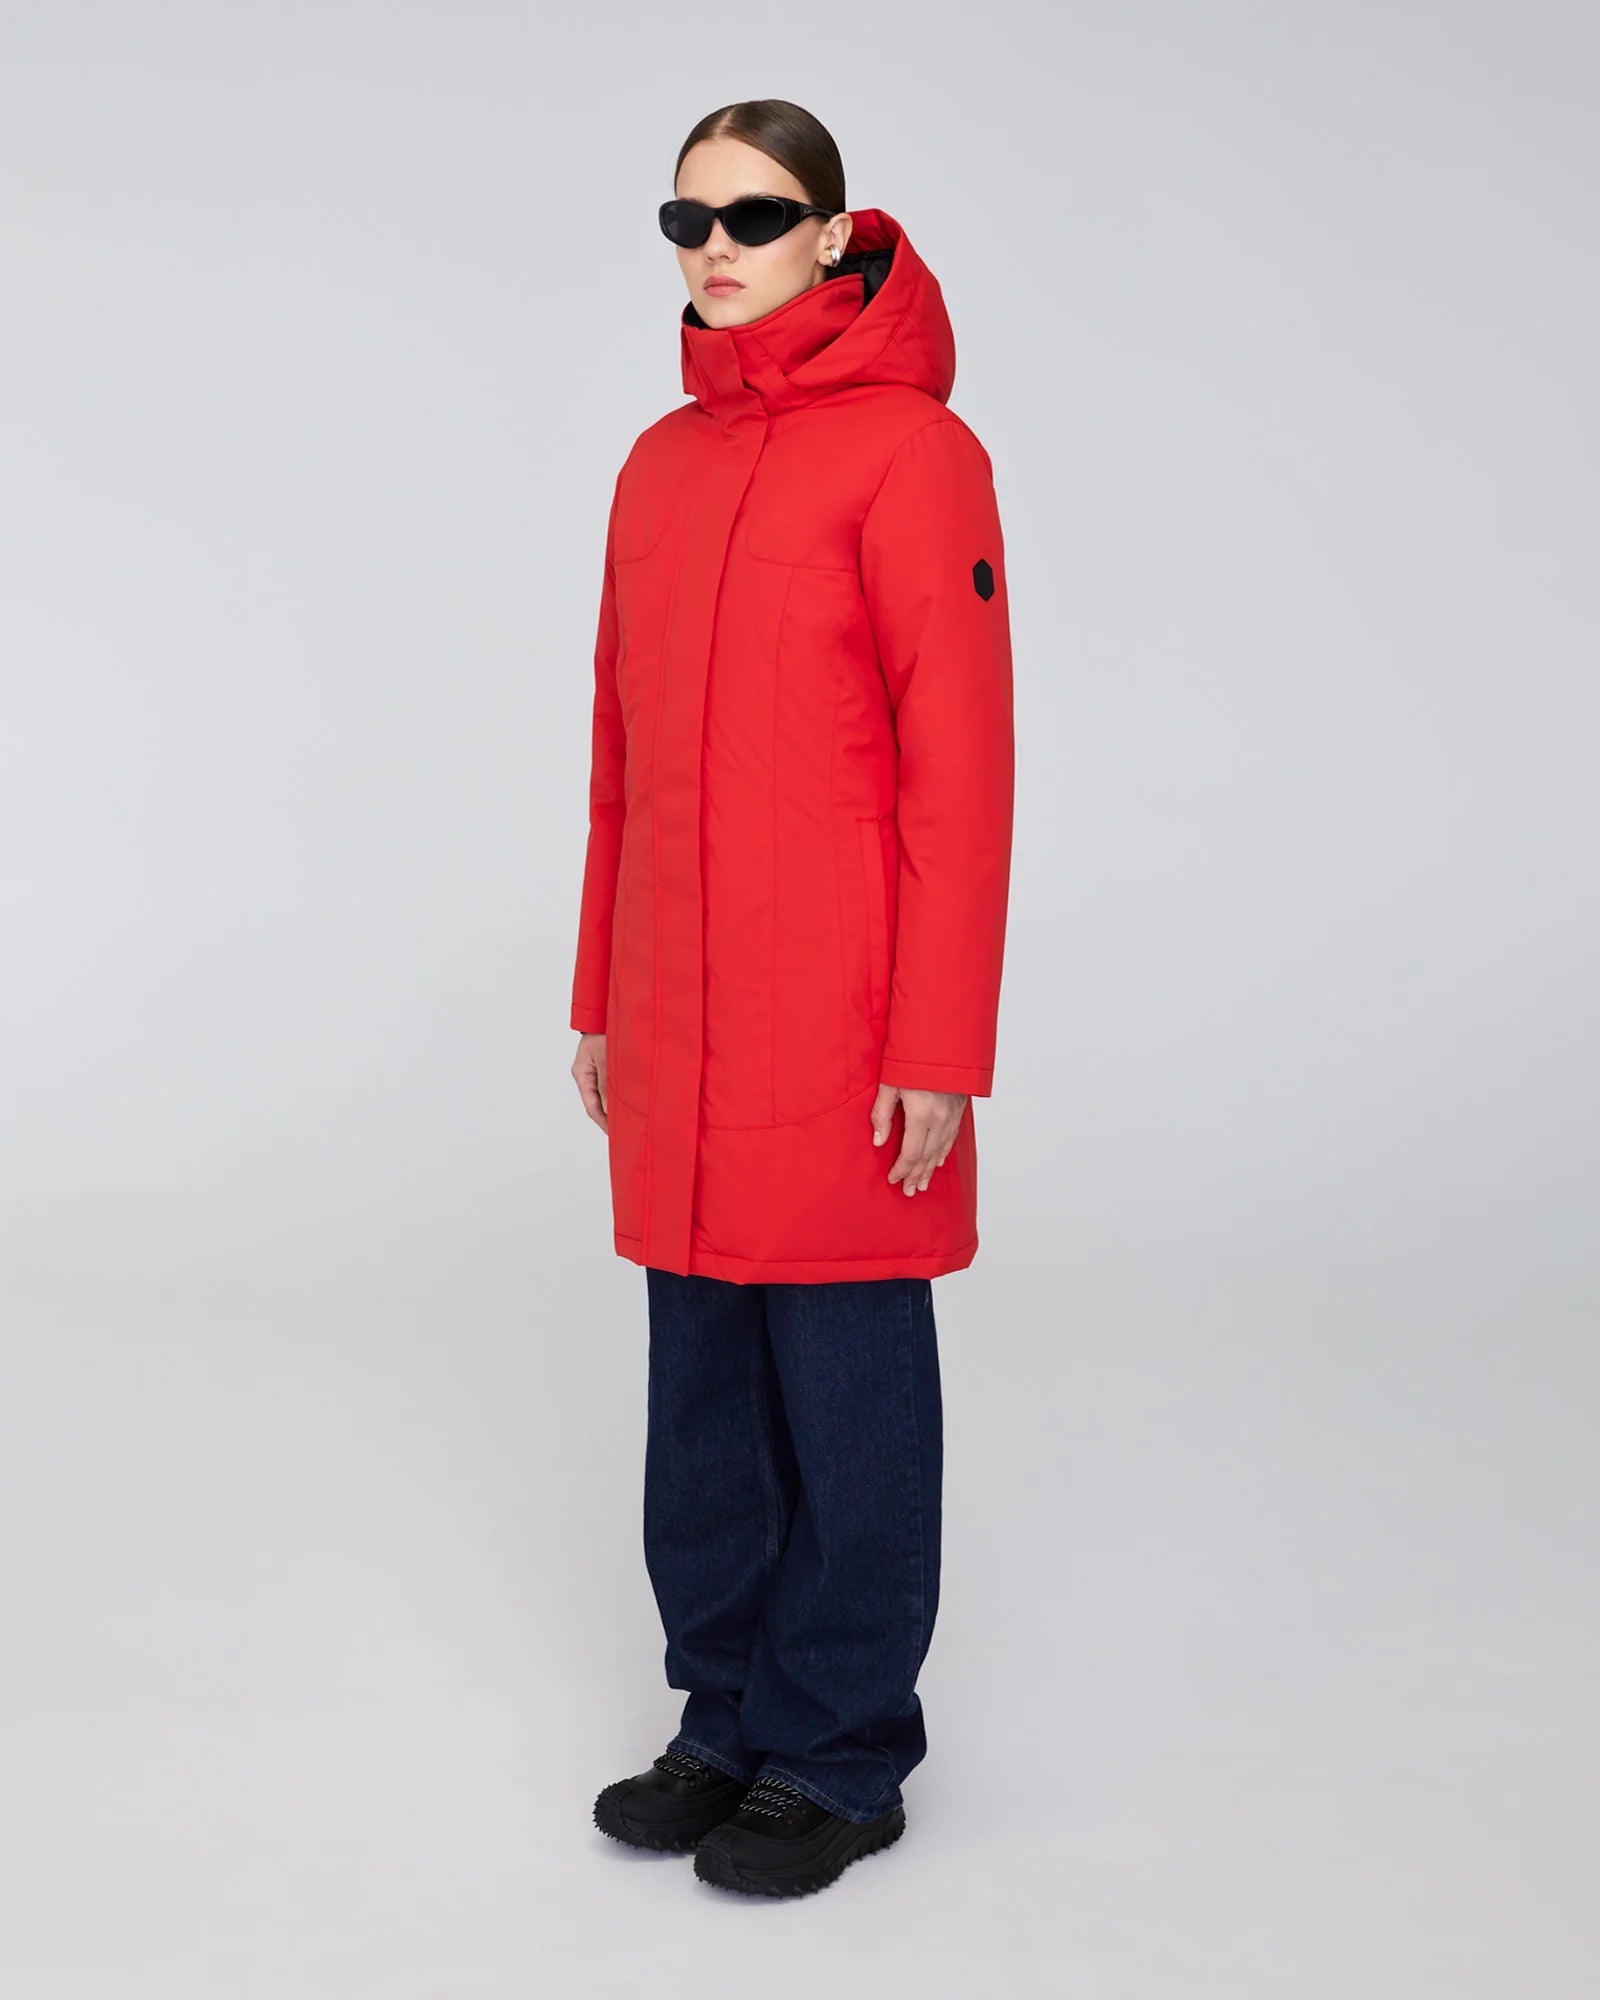 QUARTZ Co KIMBERLY 2.0 - Hooded Down Winter Jacket - Boutique Bubbles